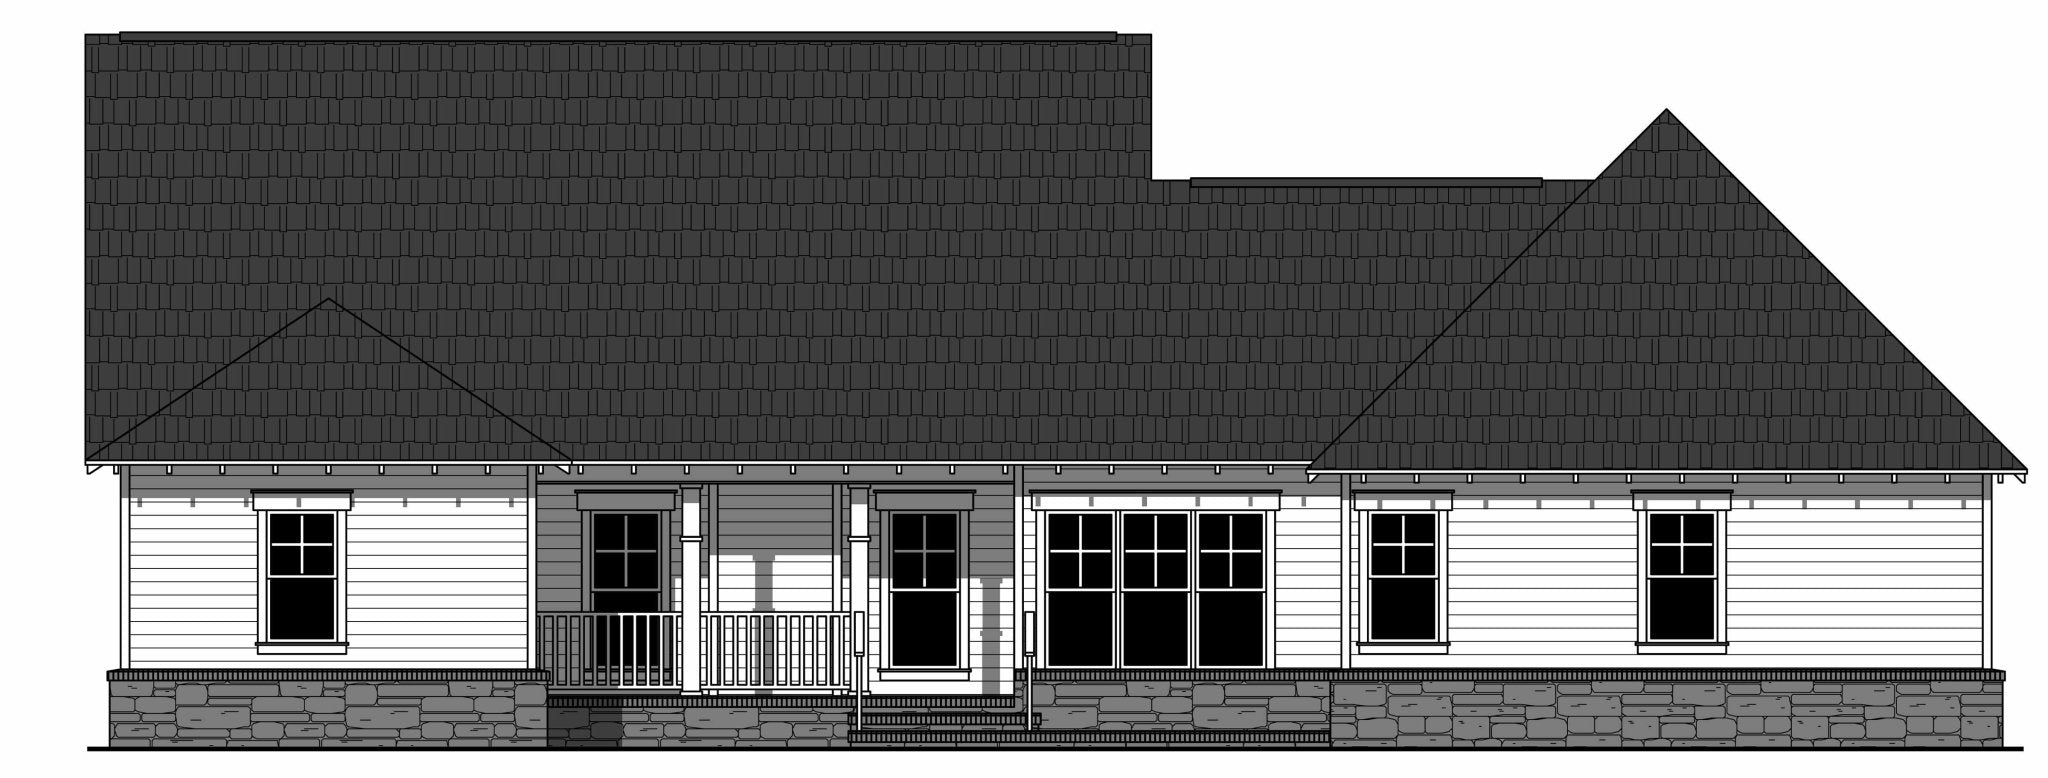 HPG-21992-1: The Madeline Lane - House Plan Gallery